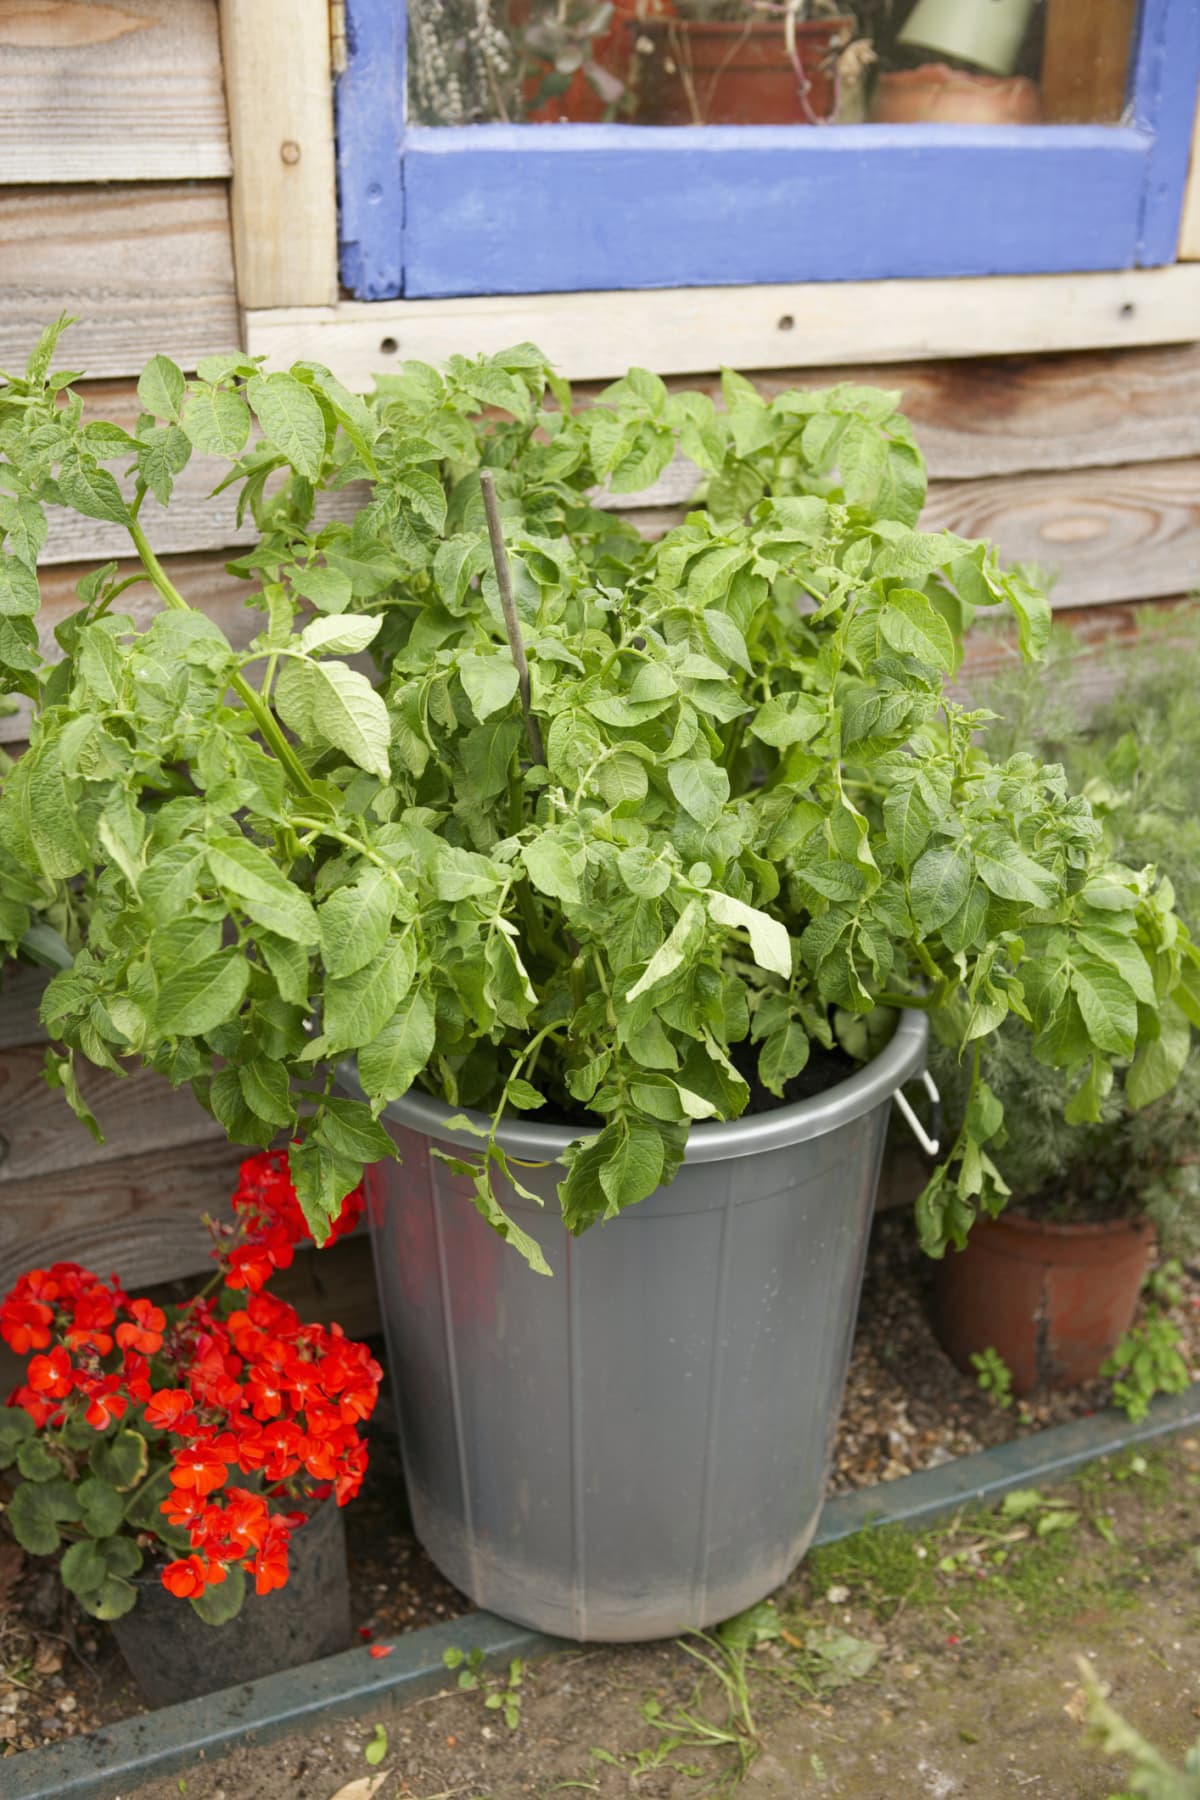 A fully grown potato plant in the pot